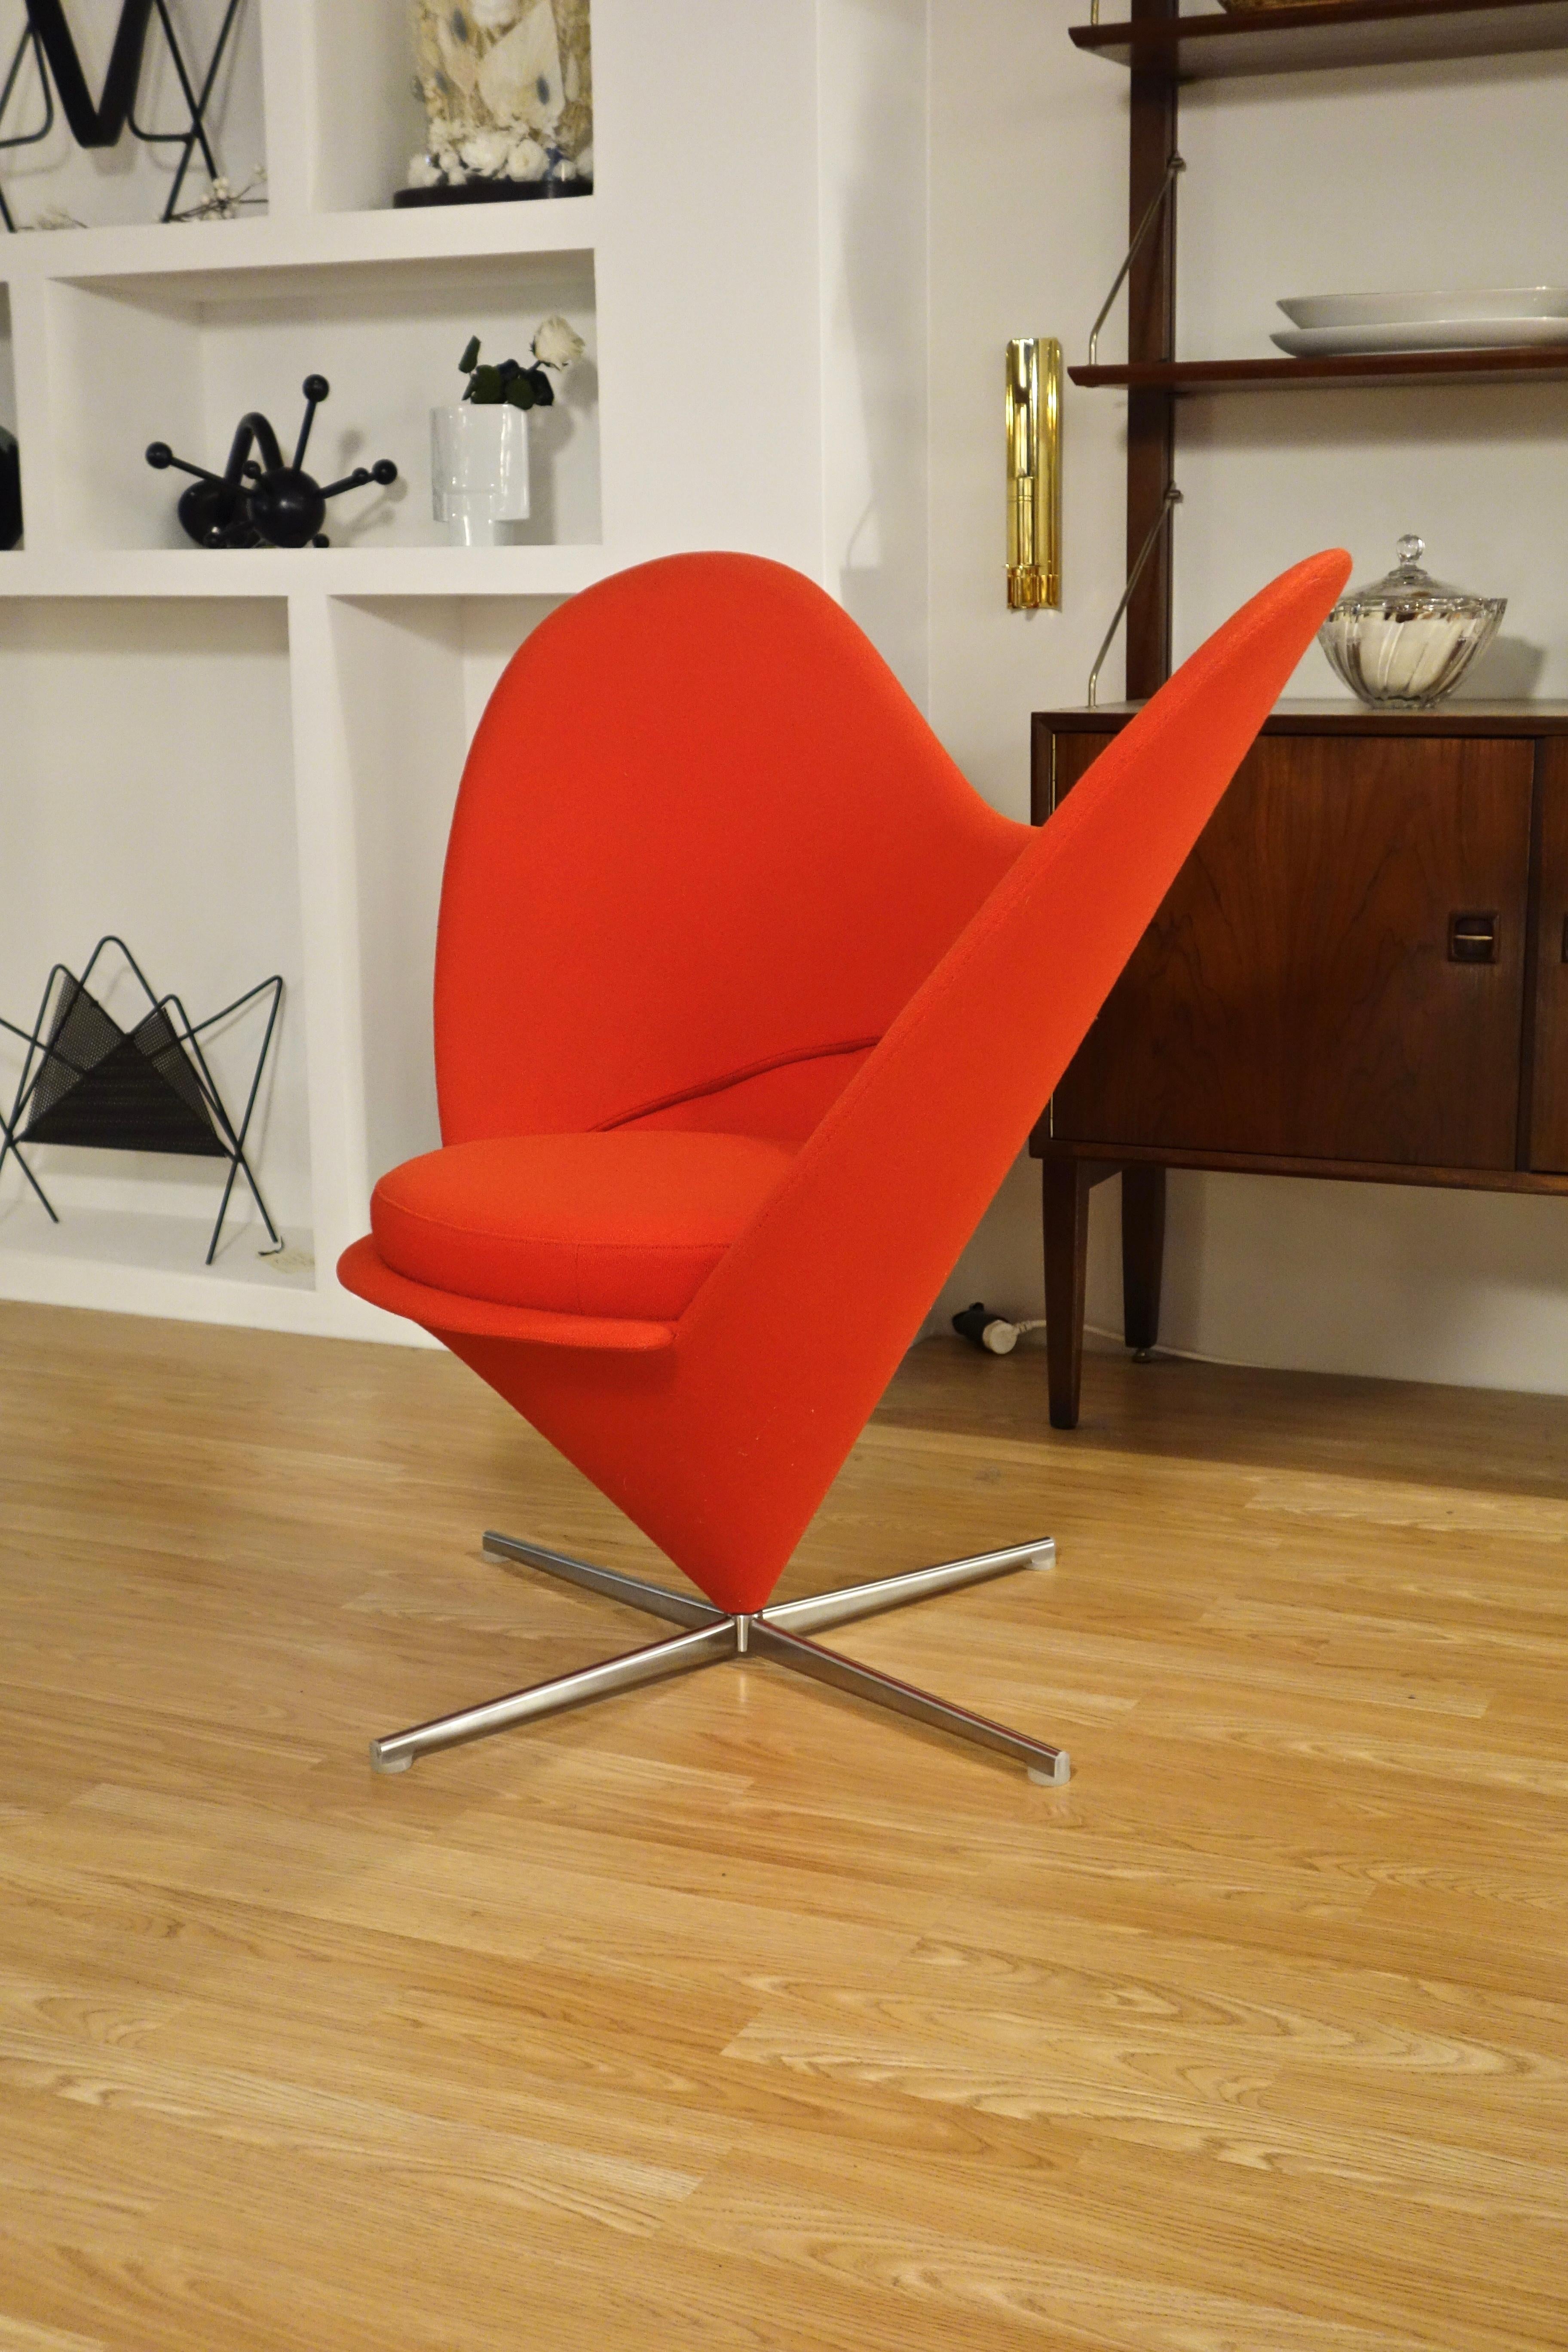 Mid-Century Modern Red Heart Cone Chair by Verner Panton for Vitra 2000s